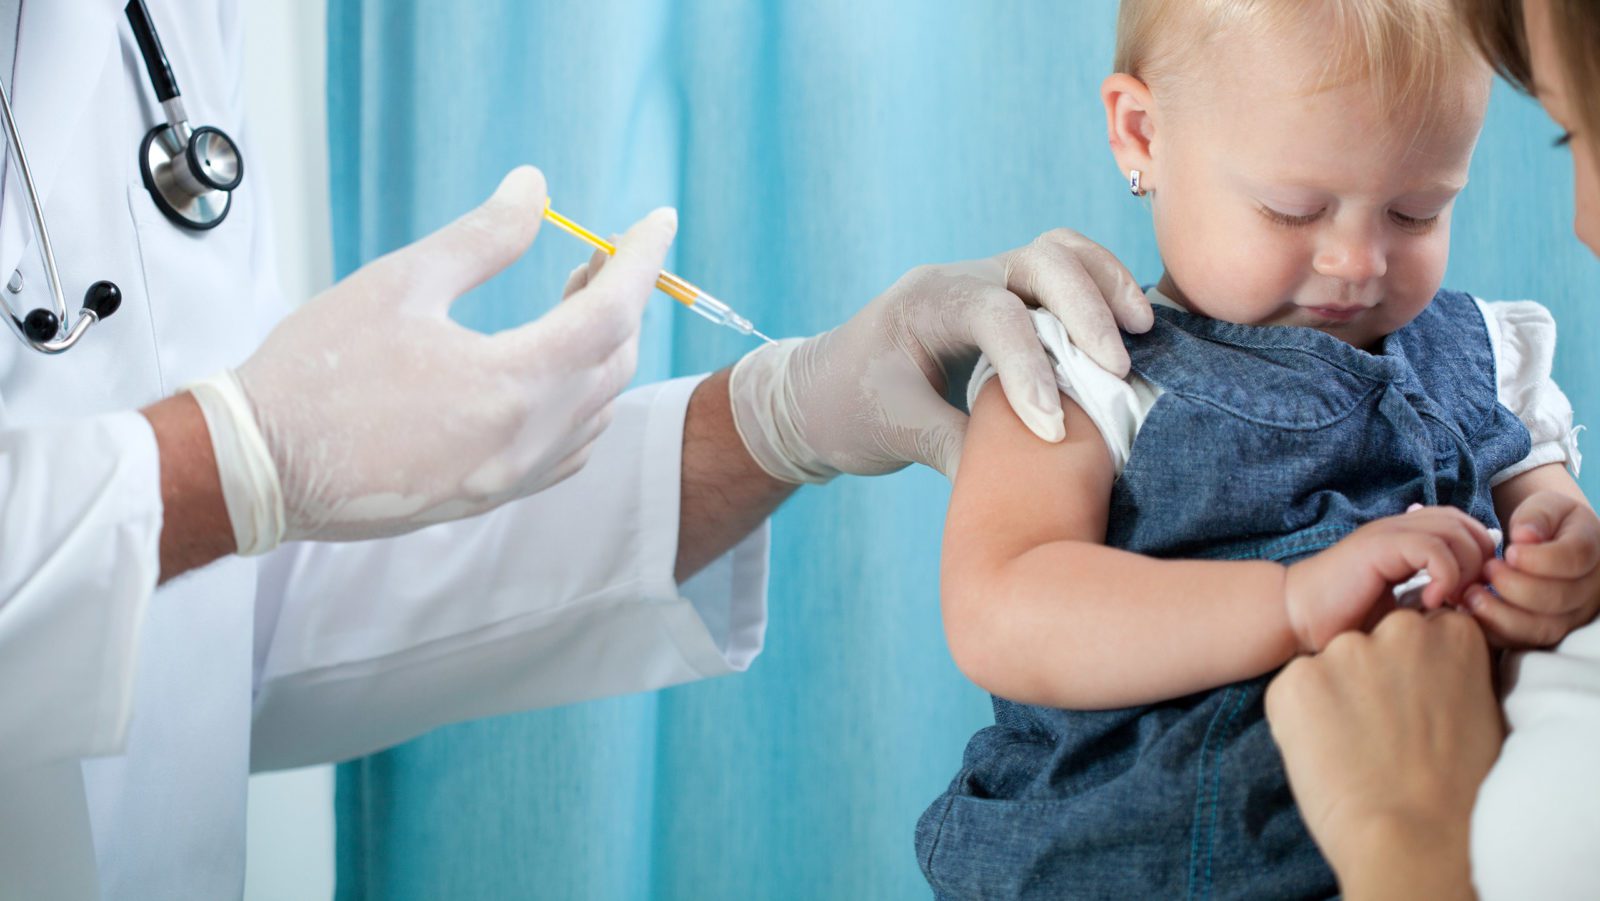 Seven ways to talk to anti-vaxxers (that might actually change their minds)  - Healthy Debate